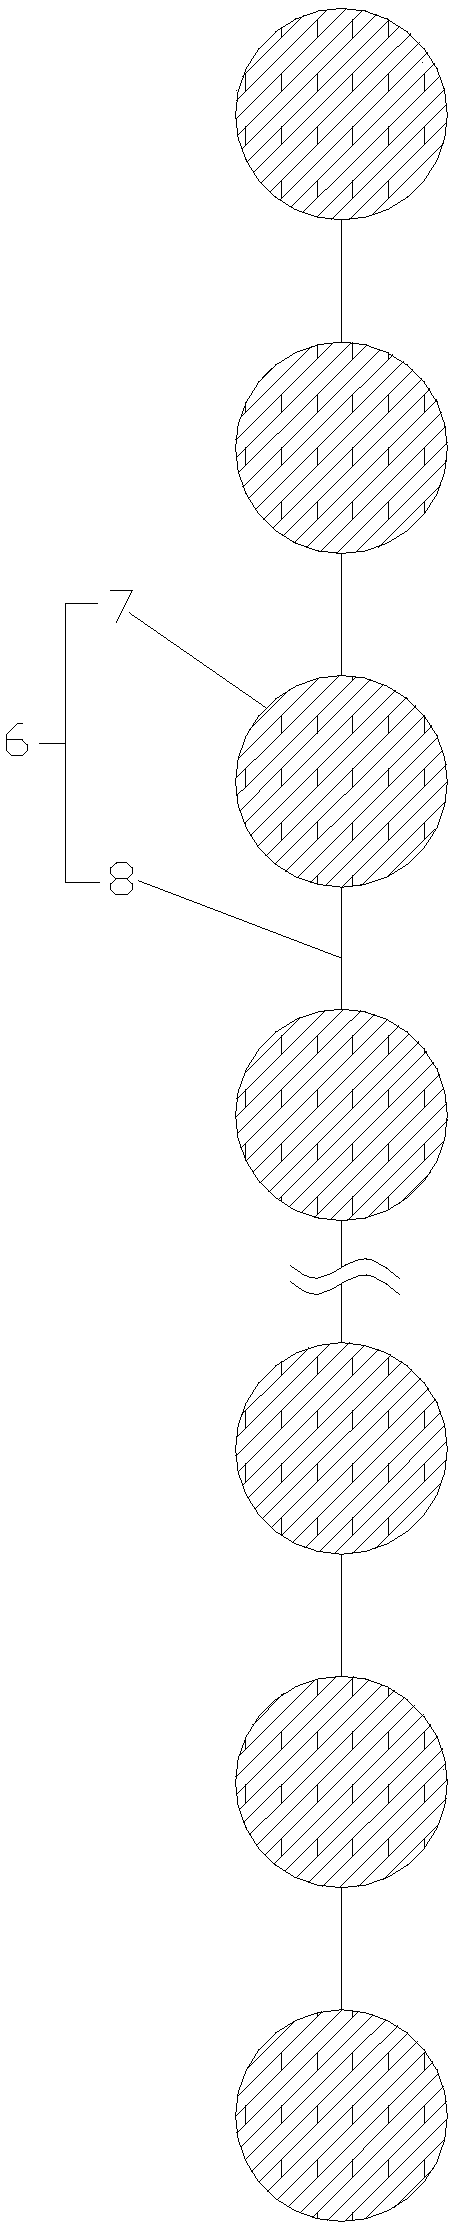 Rapid bleeding stopping device with air sac